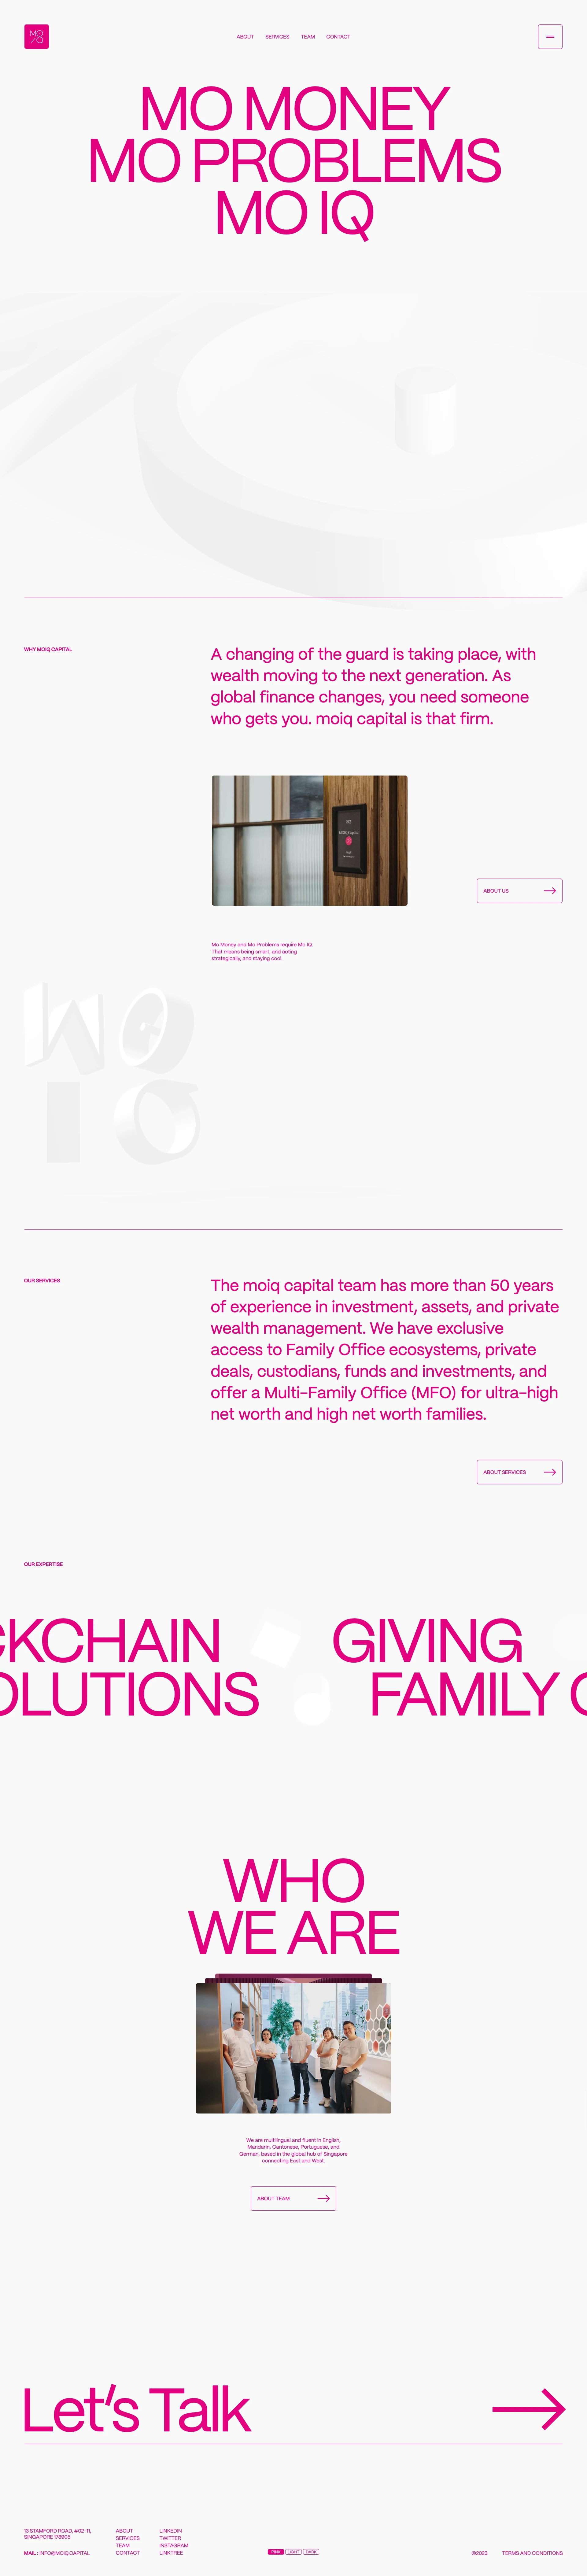 moiq capital Landing Page Example: moiq capital has more than 50 years of experience in investment, assets, and private wealth management.